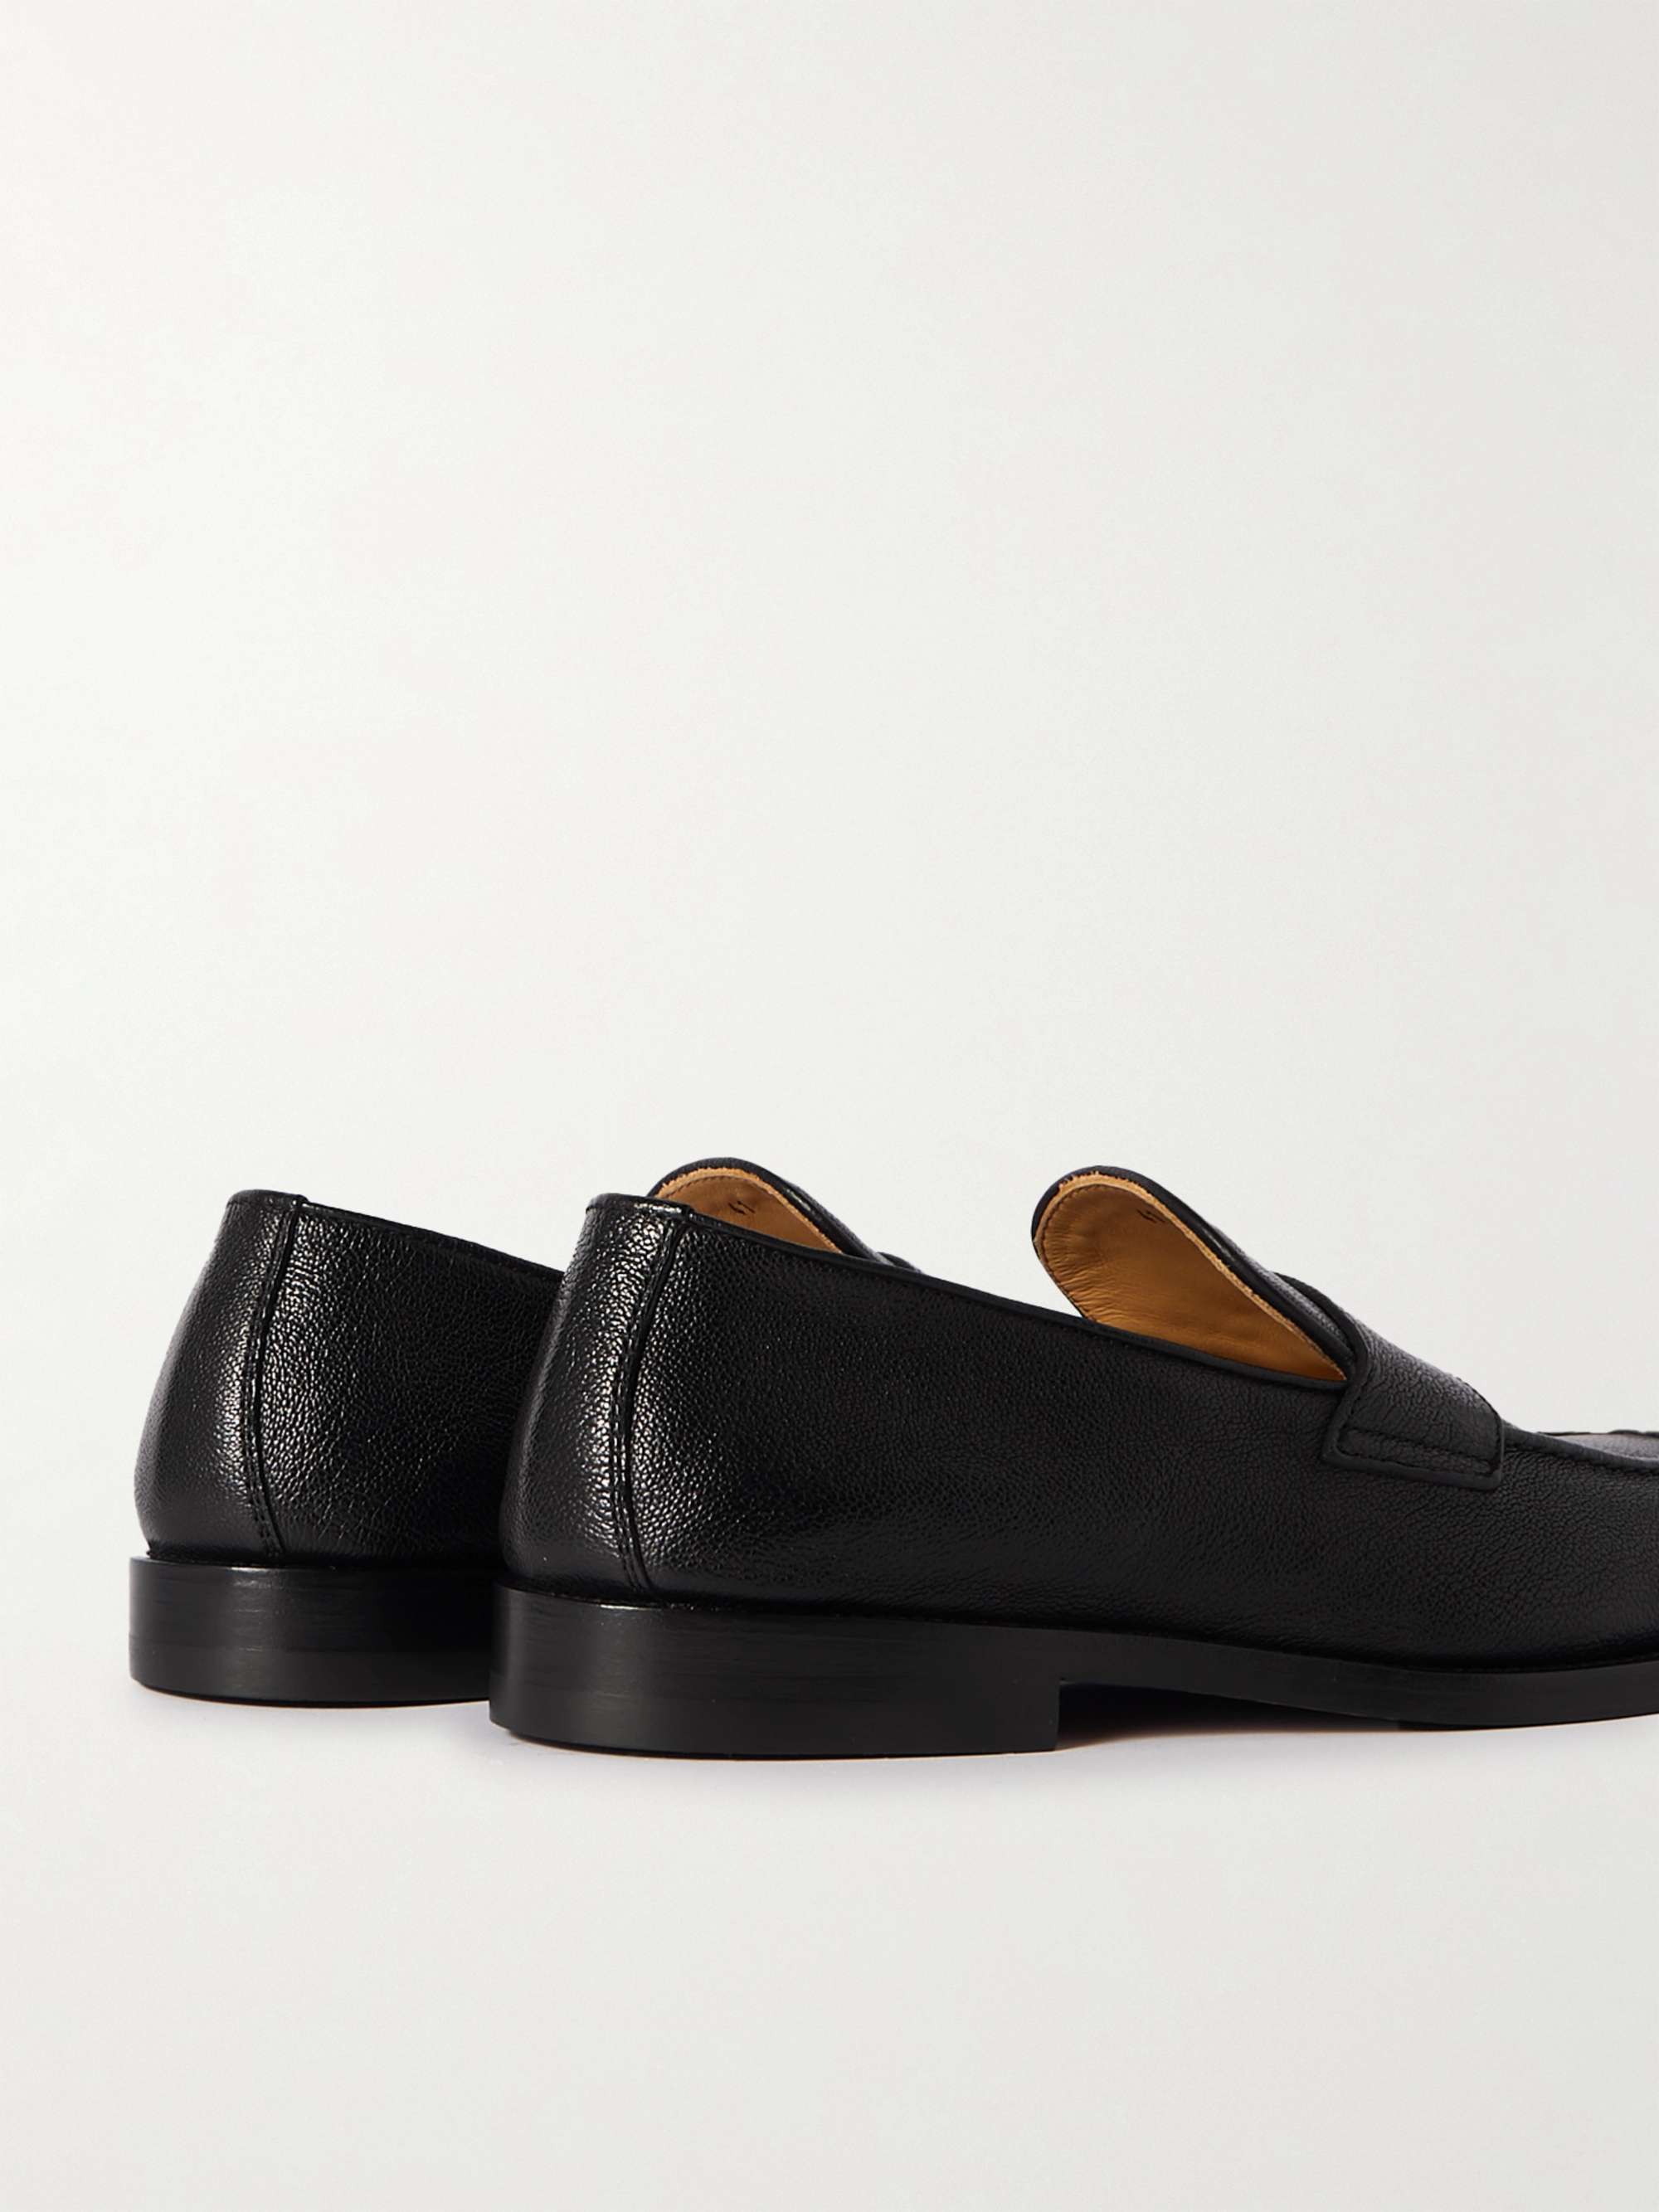 BRUNELLO CUCINELLI Leather Penny Loafers